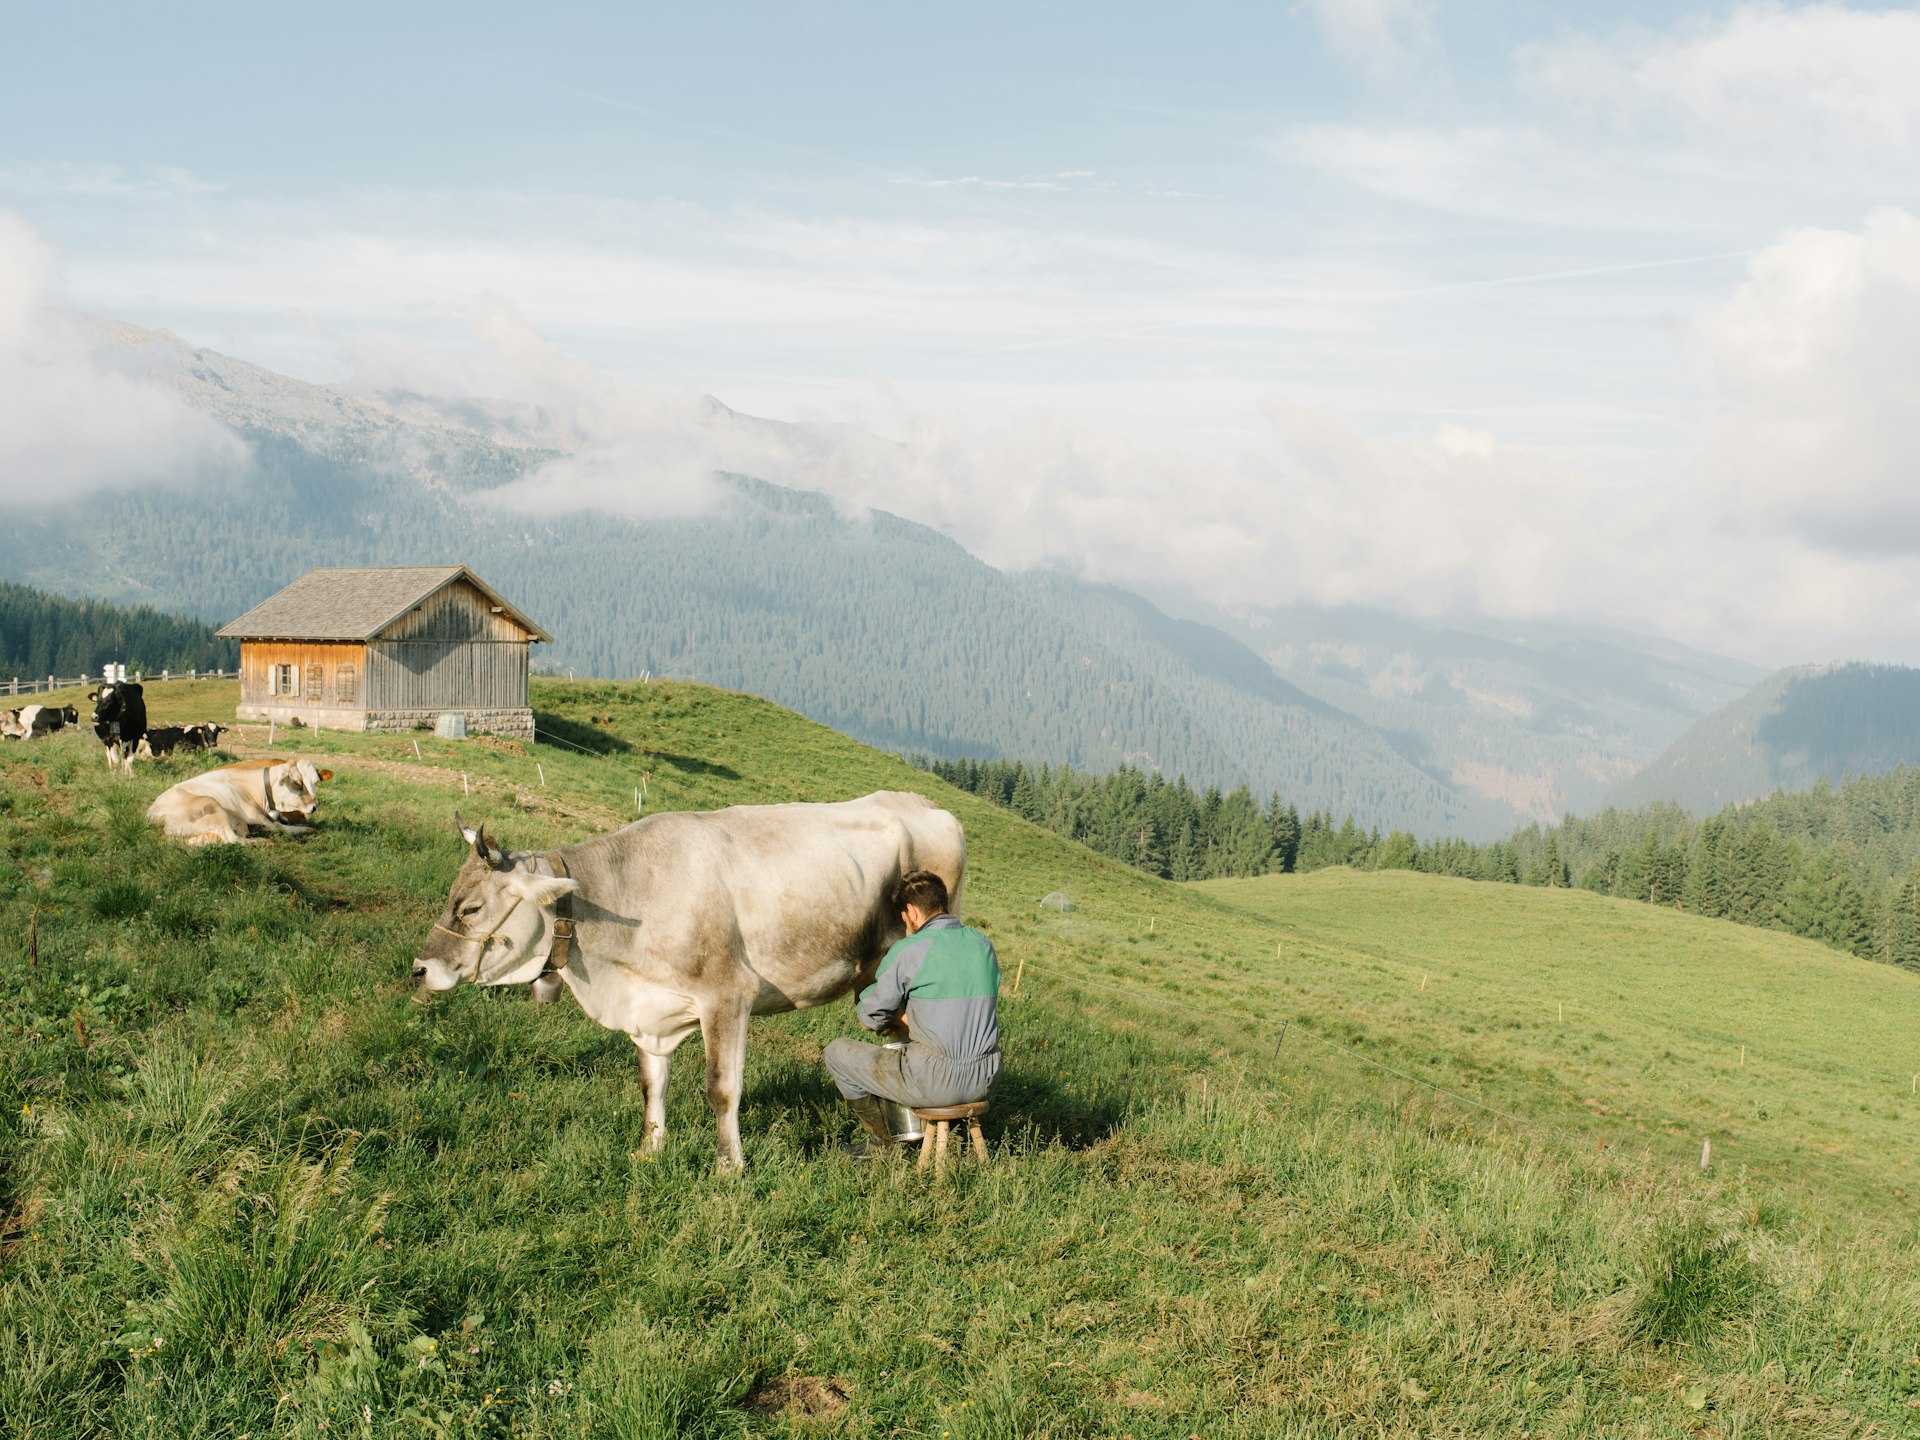 A man milking a cow in a mountain pasture